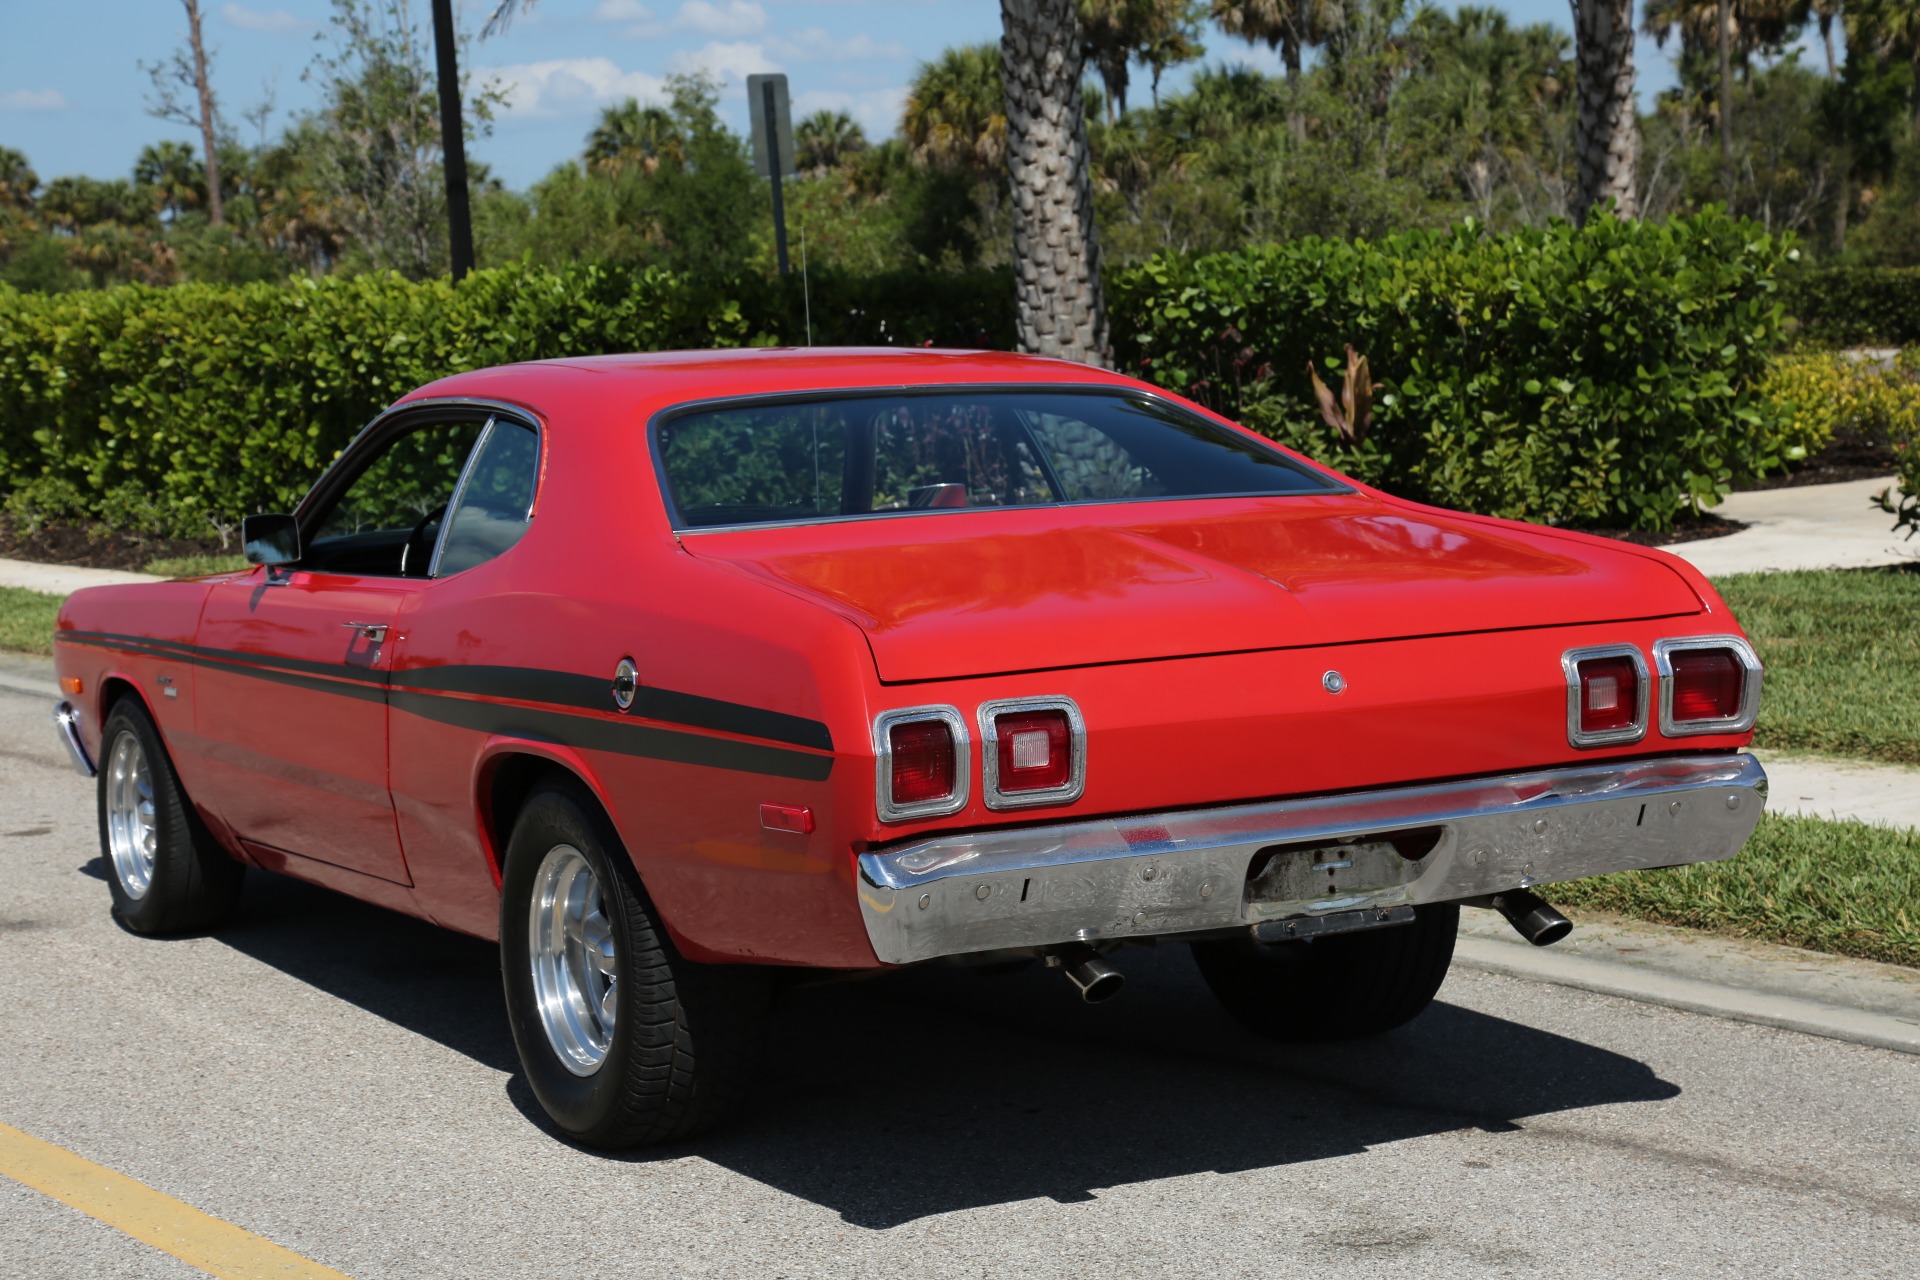 Used 1973 Dodge Dart Dart V8 Auto for sale Sold at Muscle Cars for Sale Inc. in Fort Myers FL 33912 6